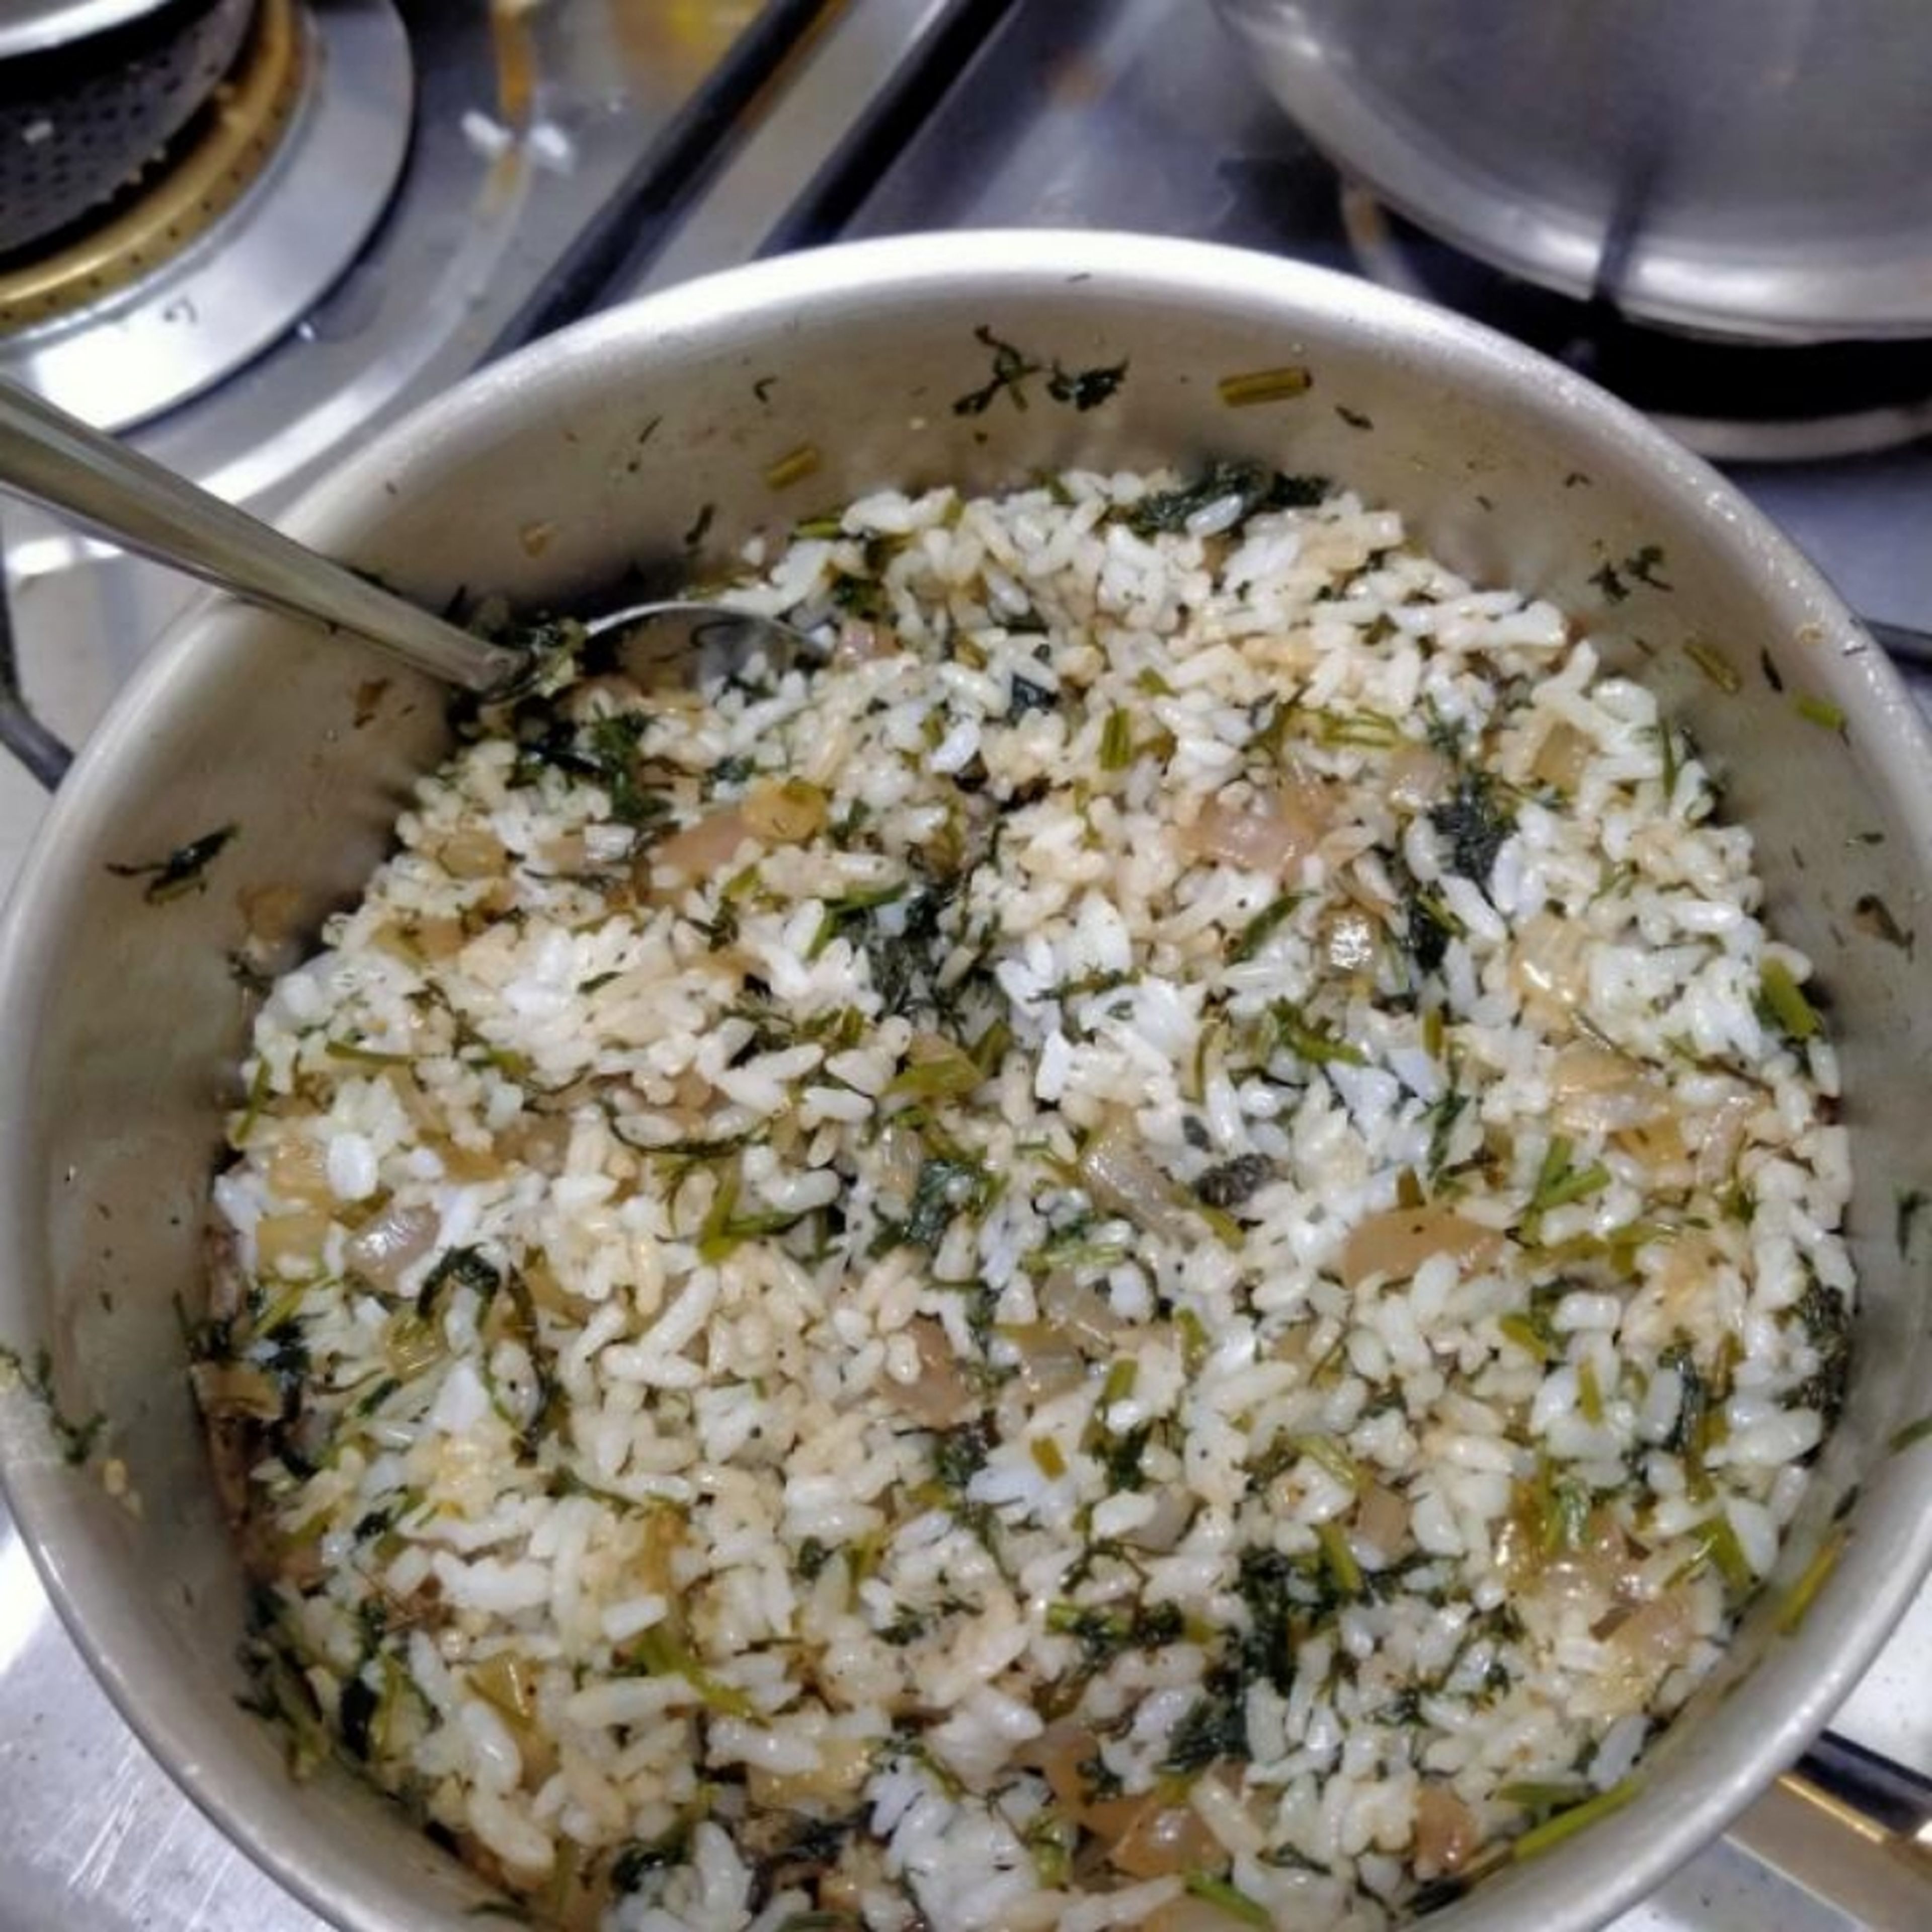 add the rice that we have cooked earlier to the onion and greens mix and mix it very well